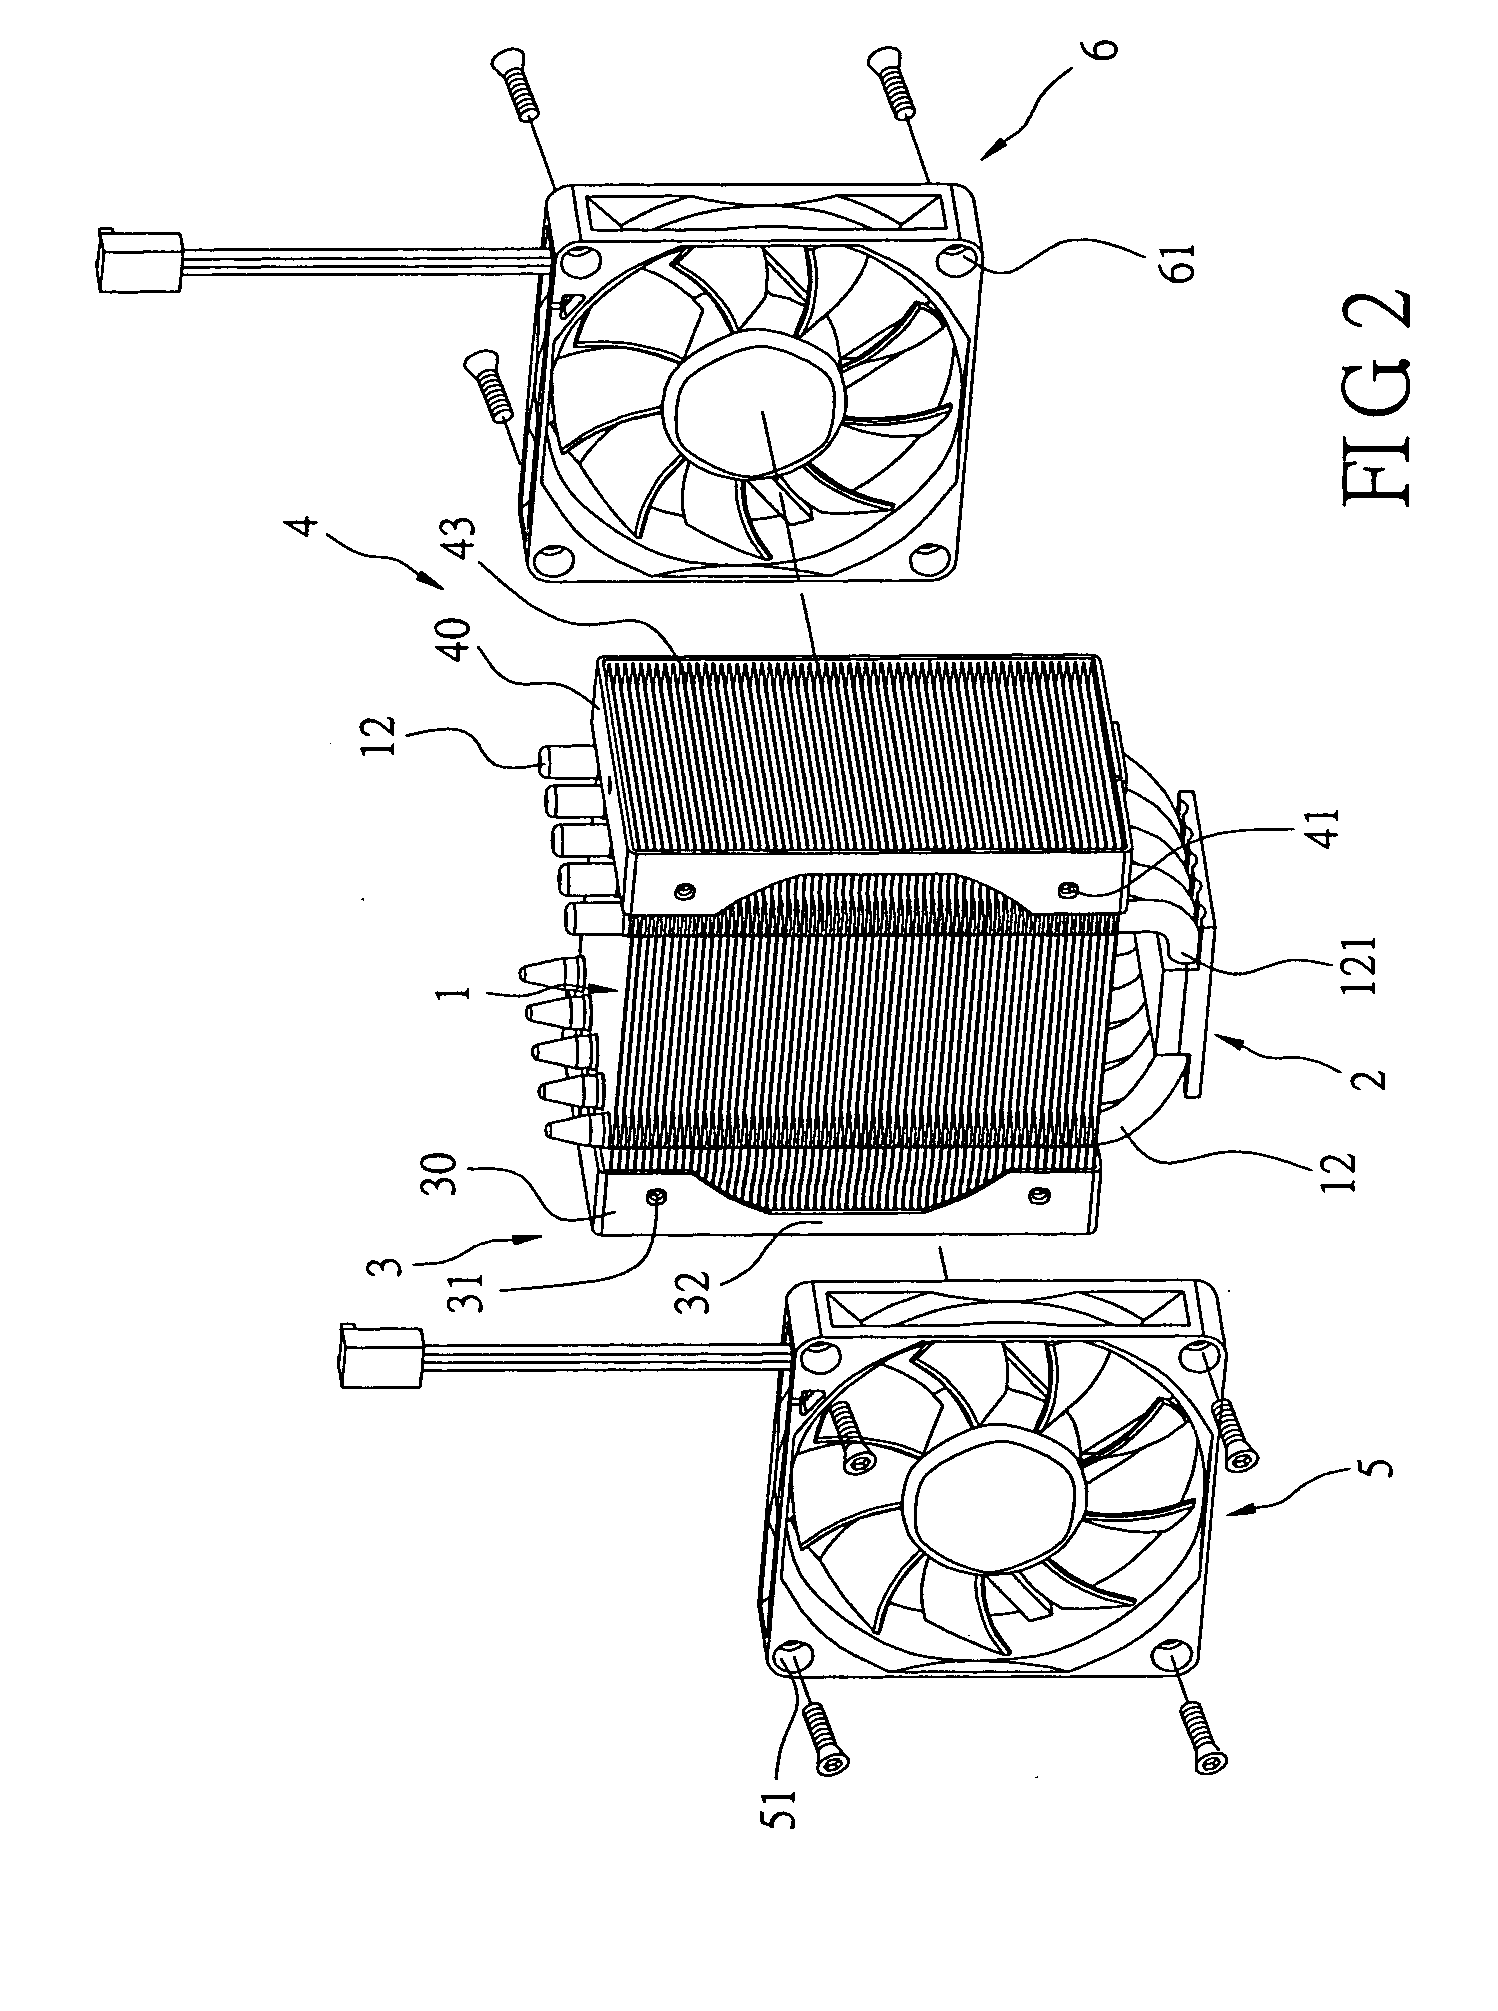 Heat dissipation module with a pair of fans